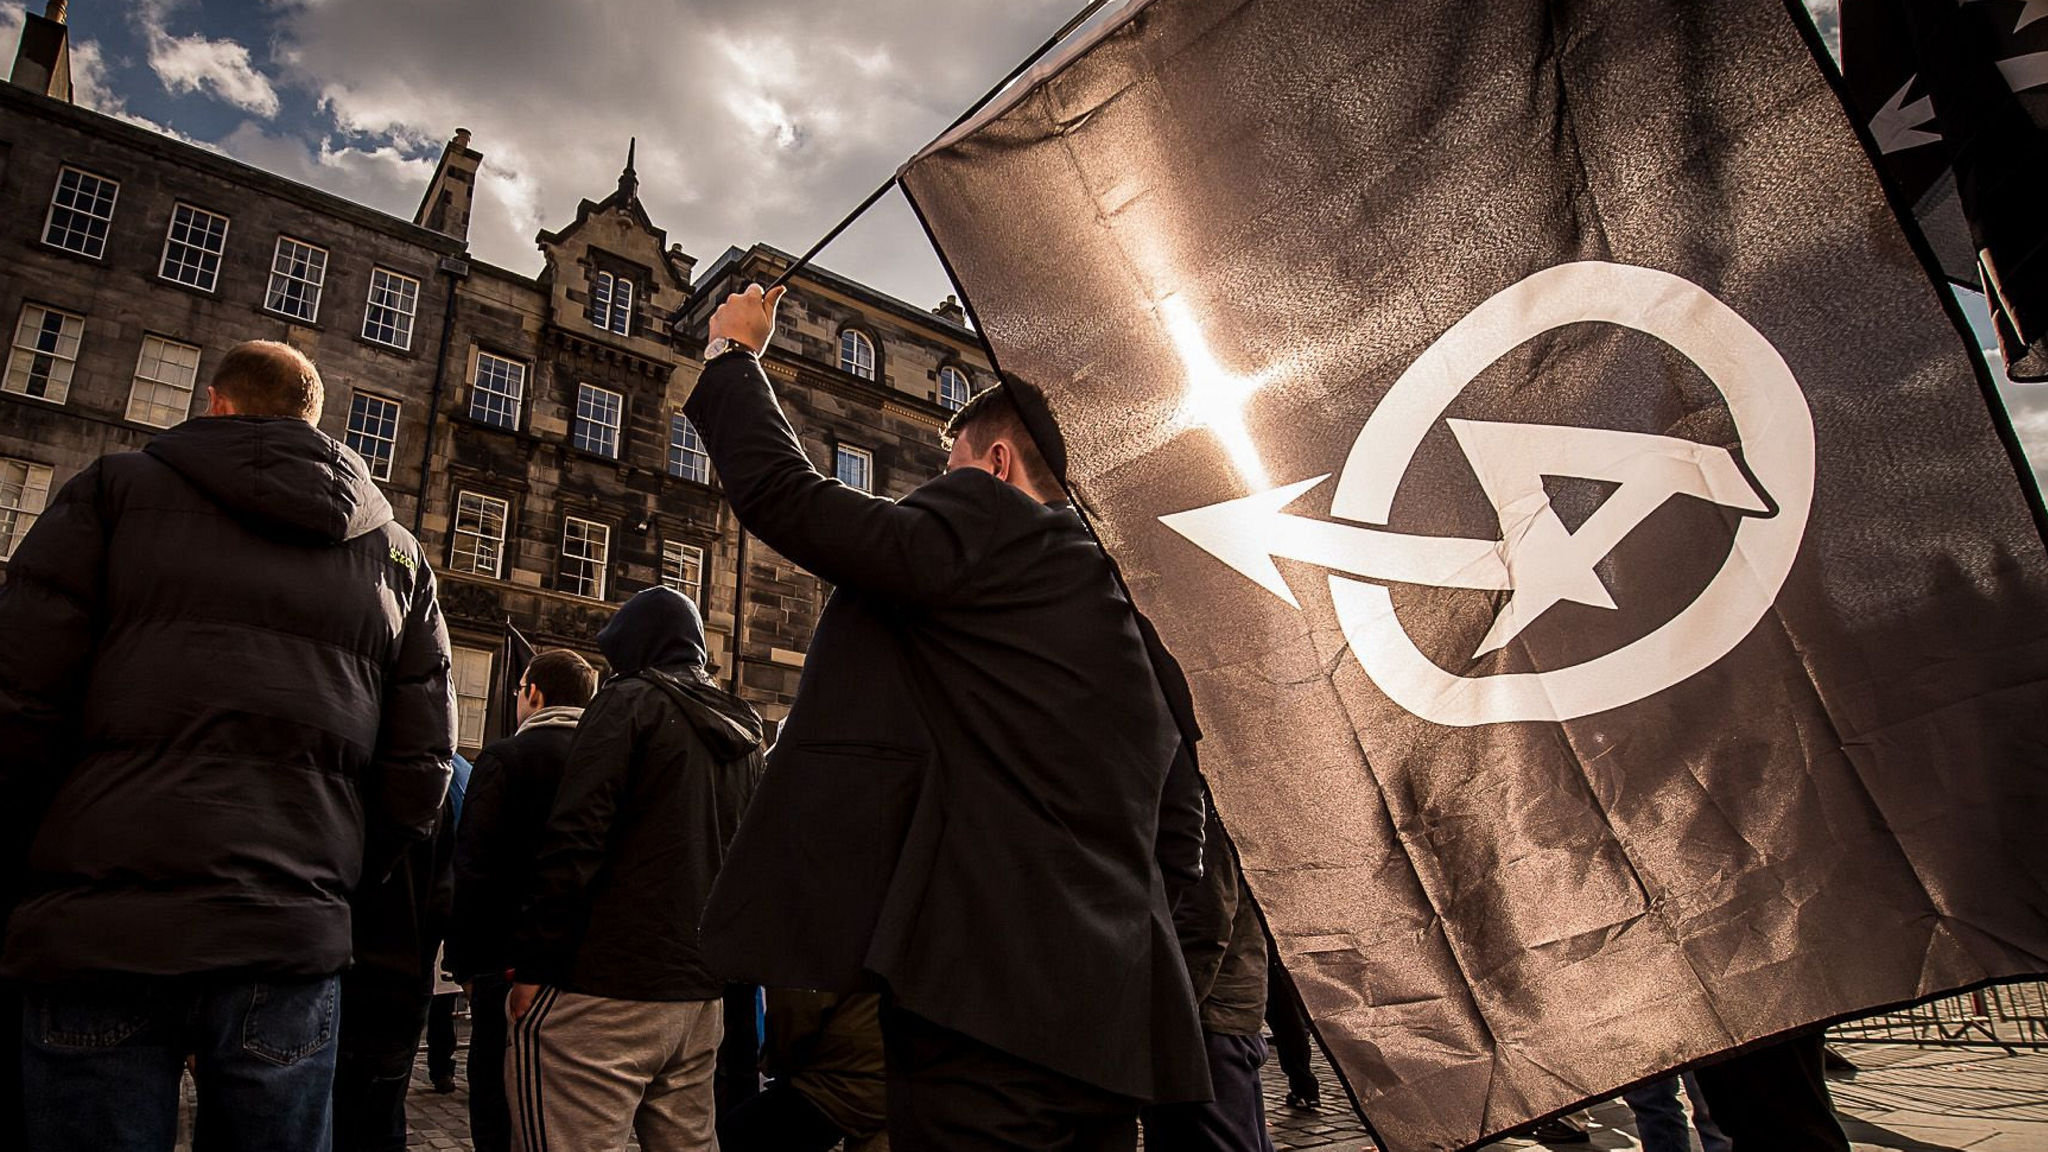  Neo-Nazi ـ  An extremist group wanted to enact "white jihad"  